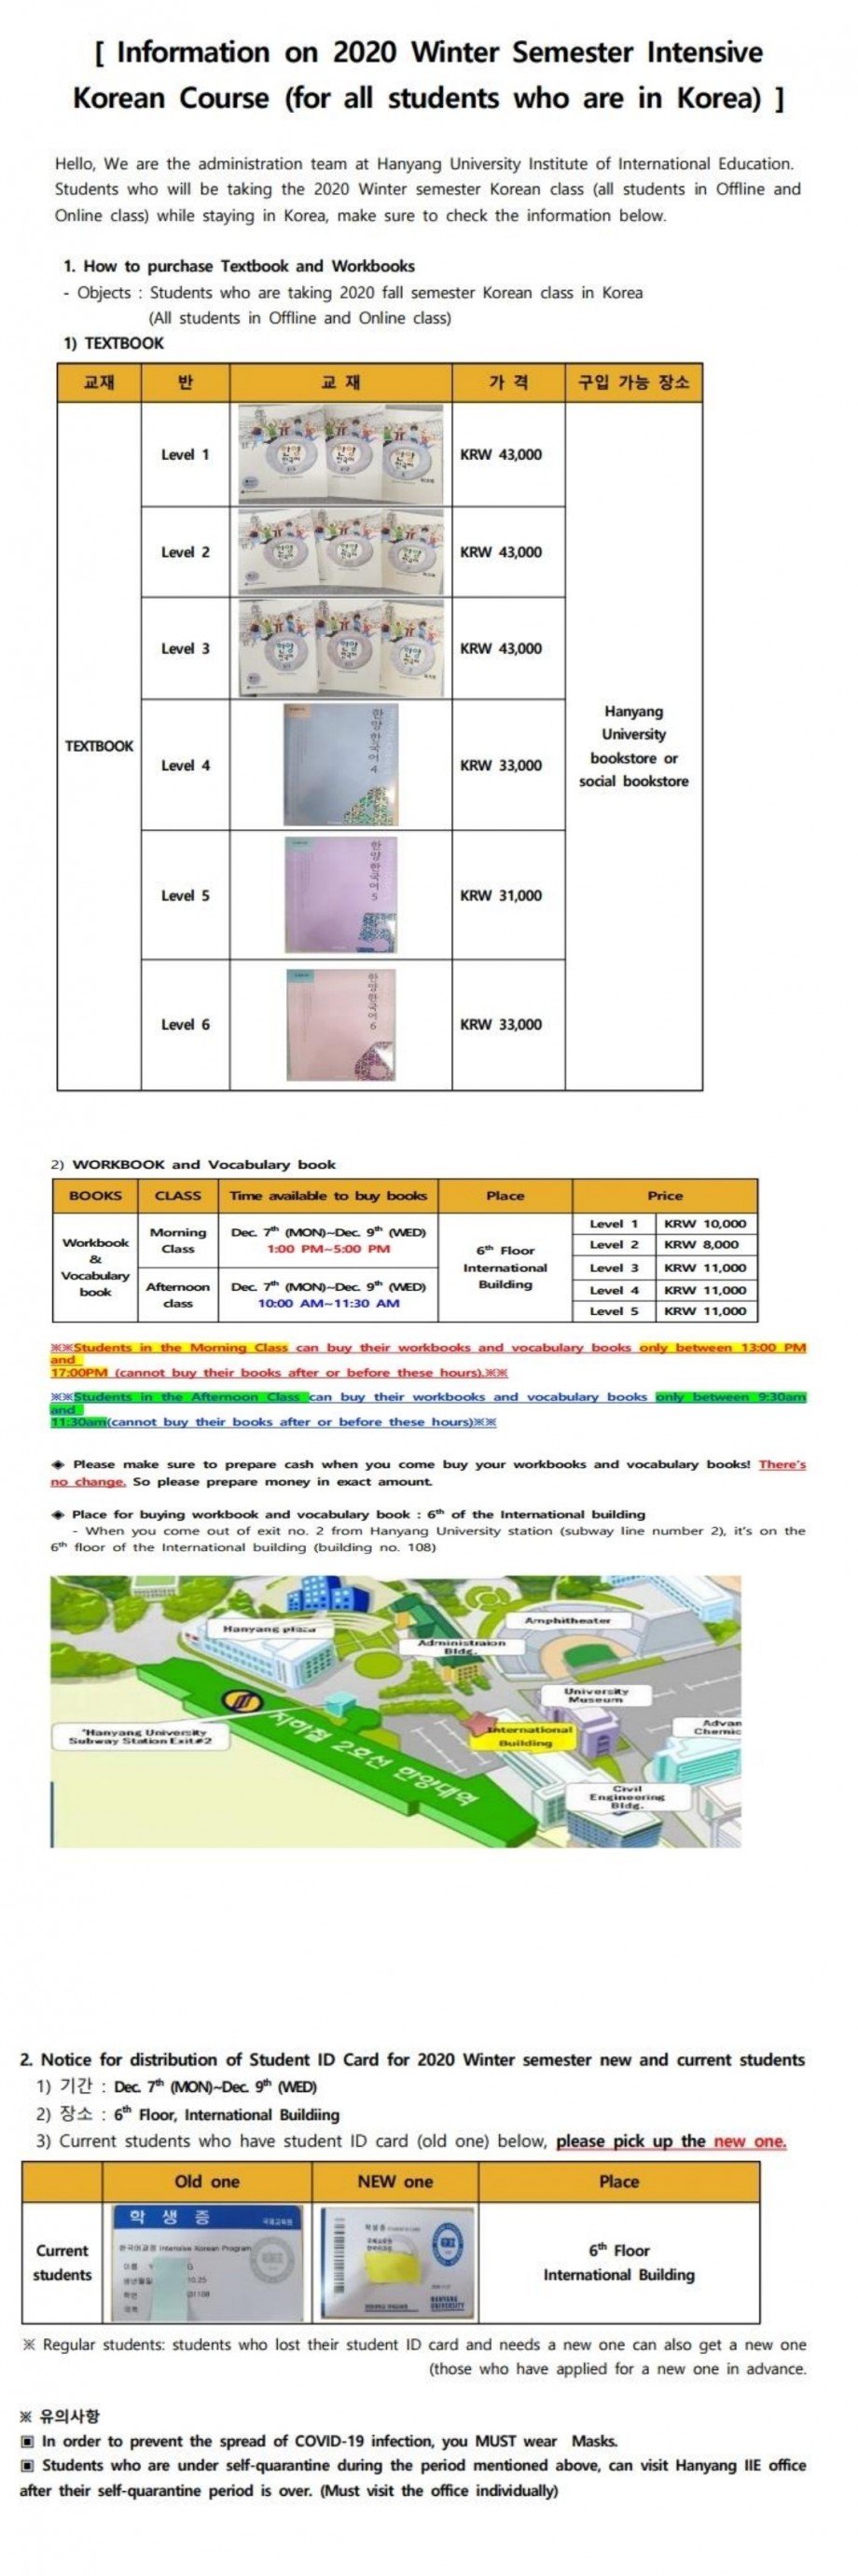 [ Information on 2020 Winter Semester Intensive Korean Course (for all students who are in Korea) ]